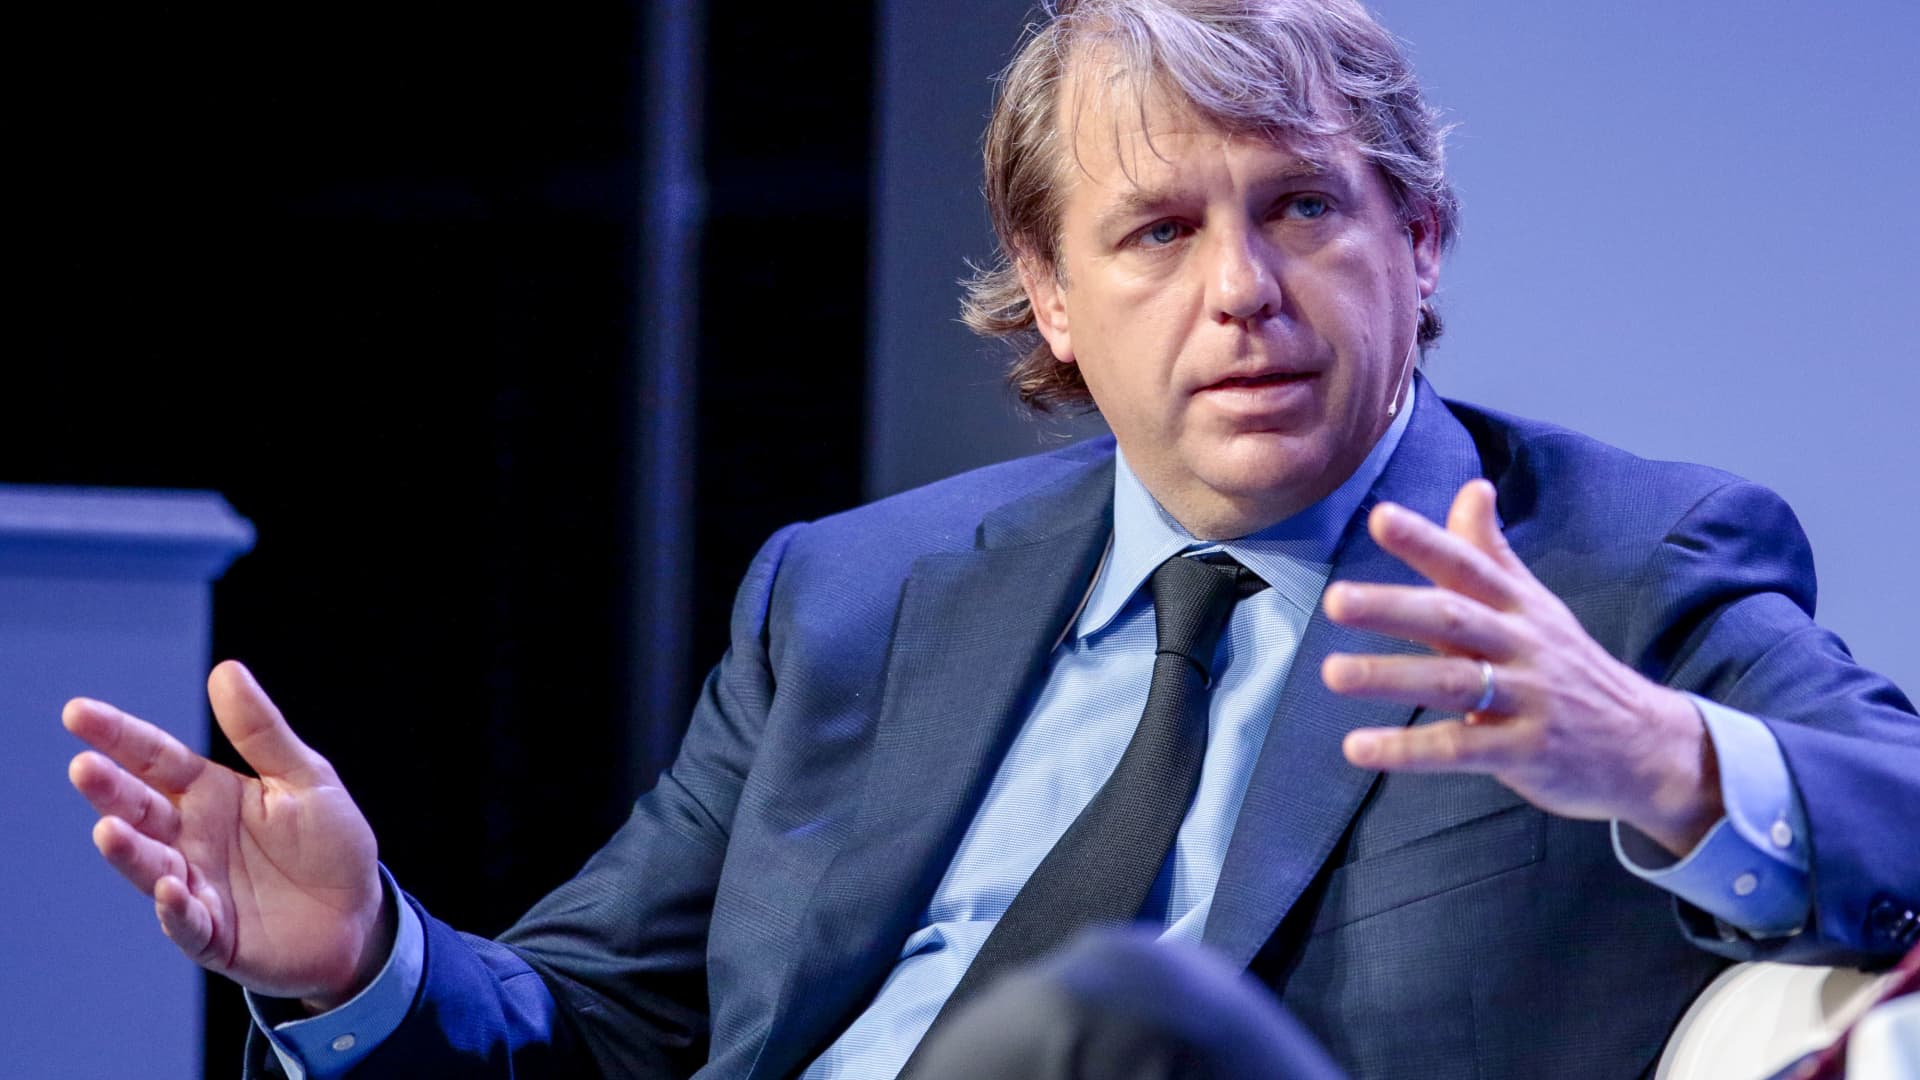 Todd Boehly, founder and chief executive officer of Eldridge Industries LLC, speaks during the Milken Institute Global Conference in Beverly Hills, California, on Tuesday, April 30, 2019.